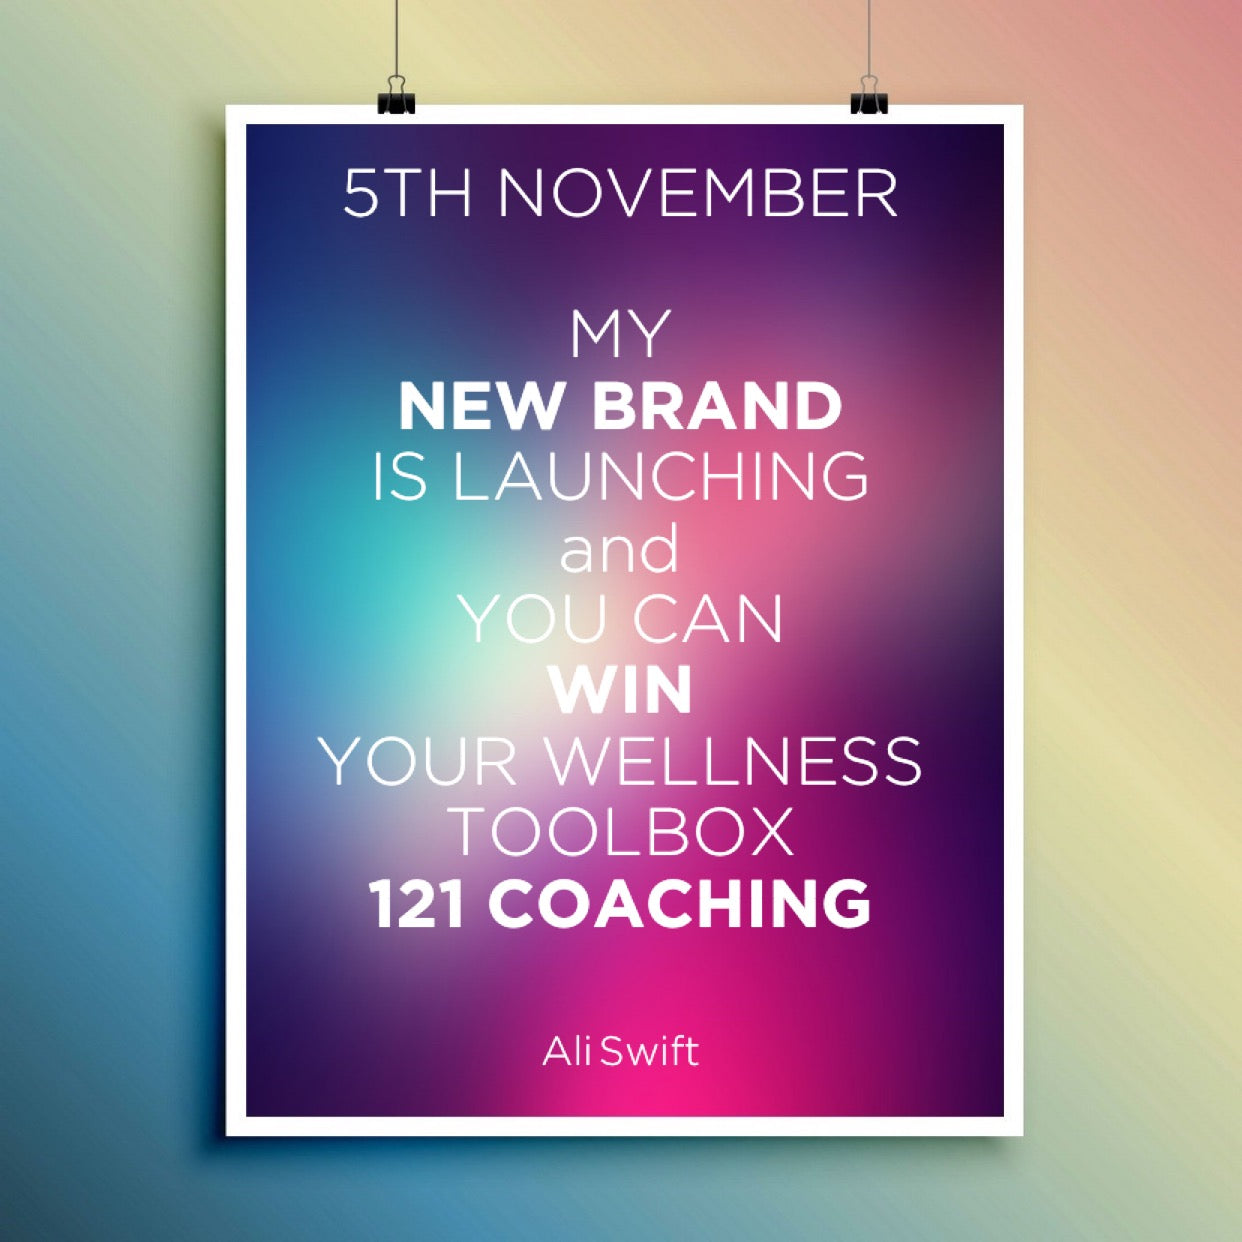 NEW BRANDING TO BE LAUNCHED THIS WEEK... AND YOUR CHANCE TO WIN A 121 COACHING SESSION